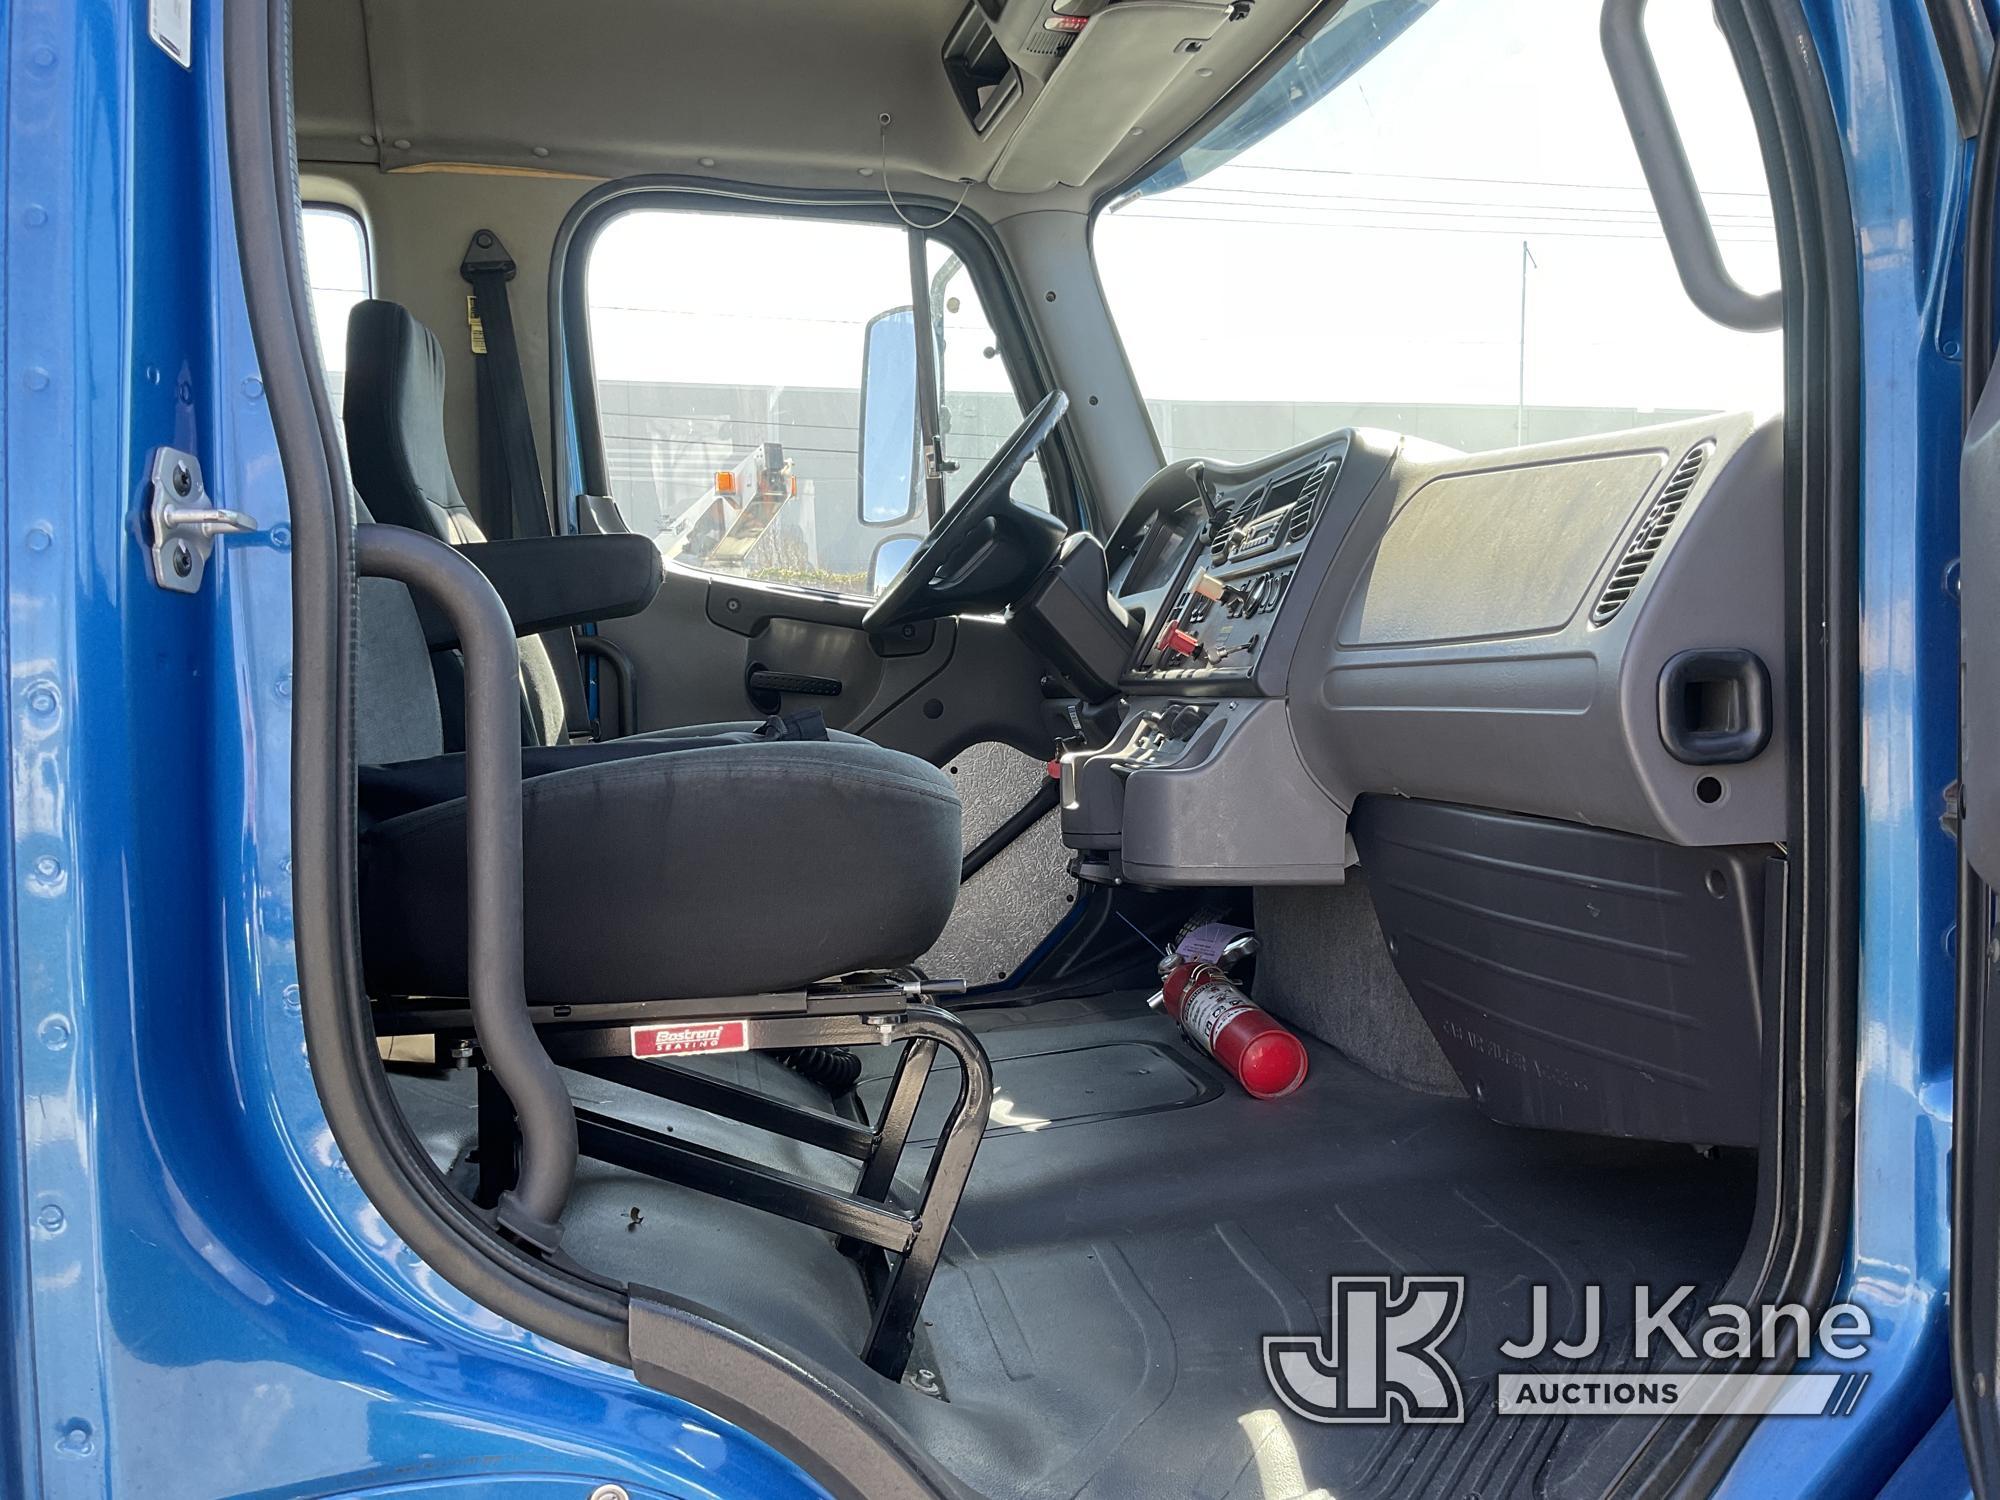 (Jurupa Valley, CA) 2009 Freightliner M2 106 Extended-Cab Flatbed Truck Runs & Moves, Check Engine L